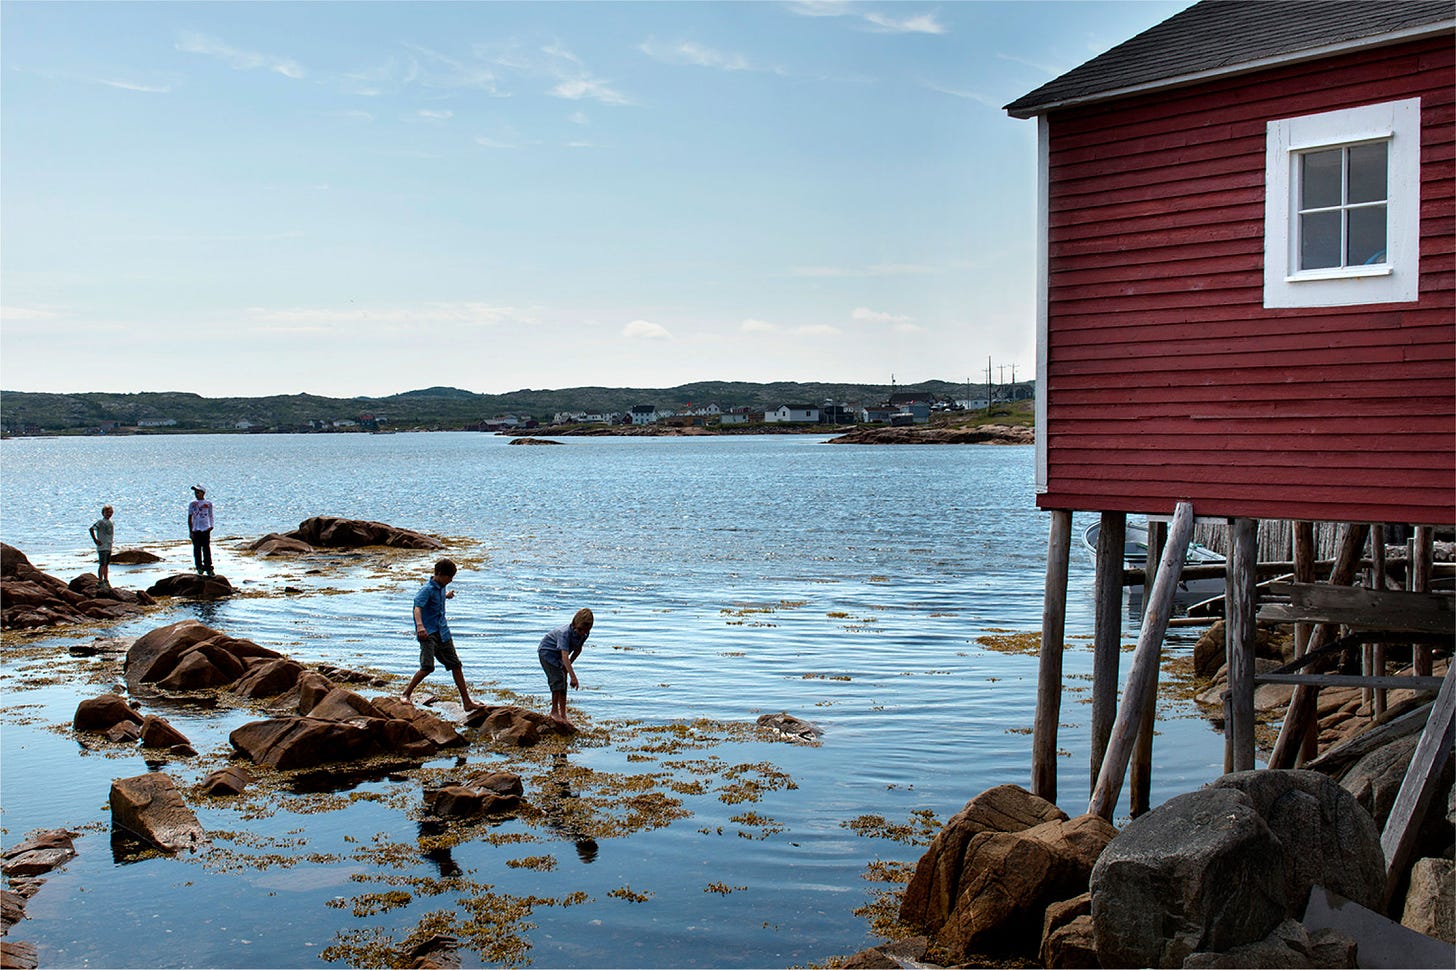 Photograph of four people standing on rocks at the edge of a body of calm blue water; a rustic red building on stilts edges into the frame from the right and other buildings and boats are barely visible in the distance